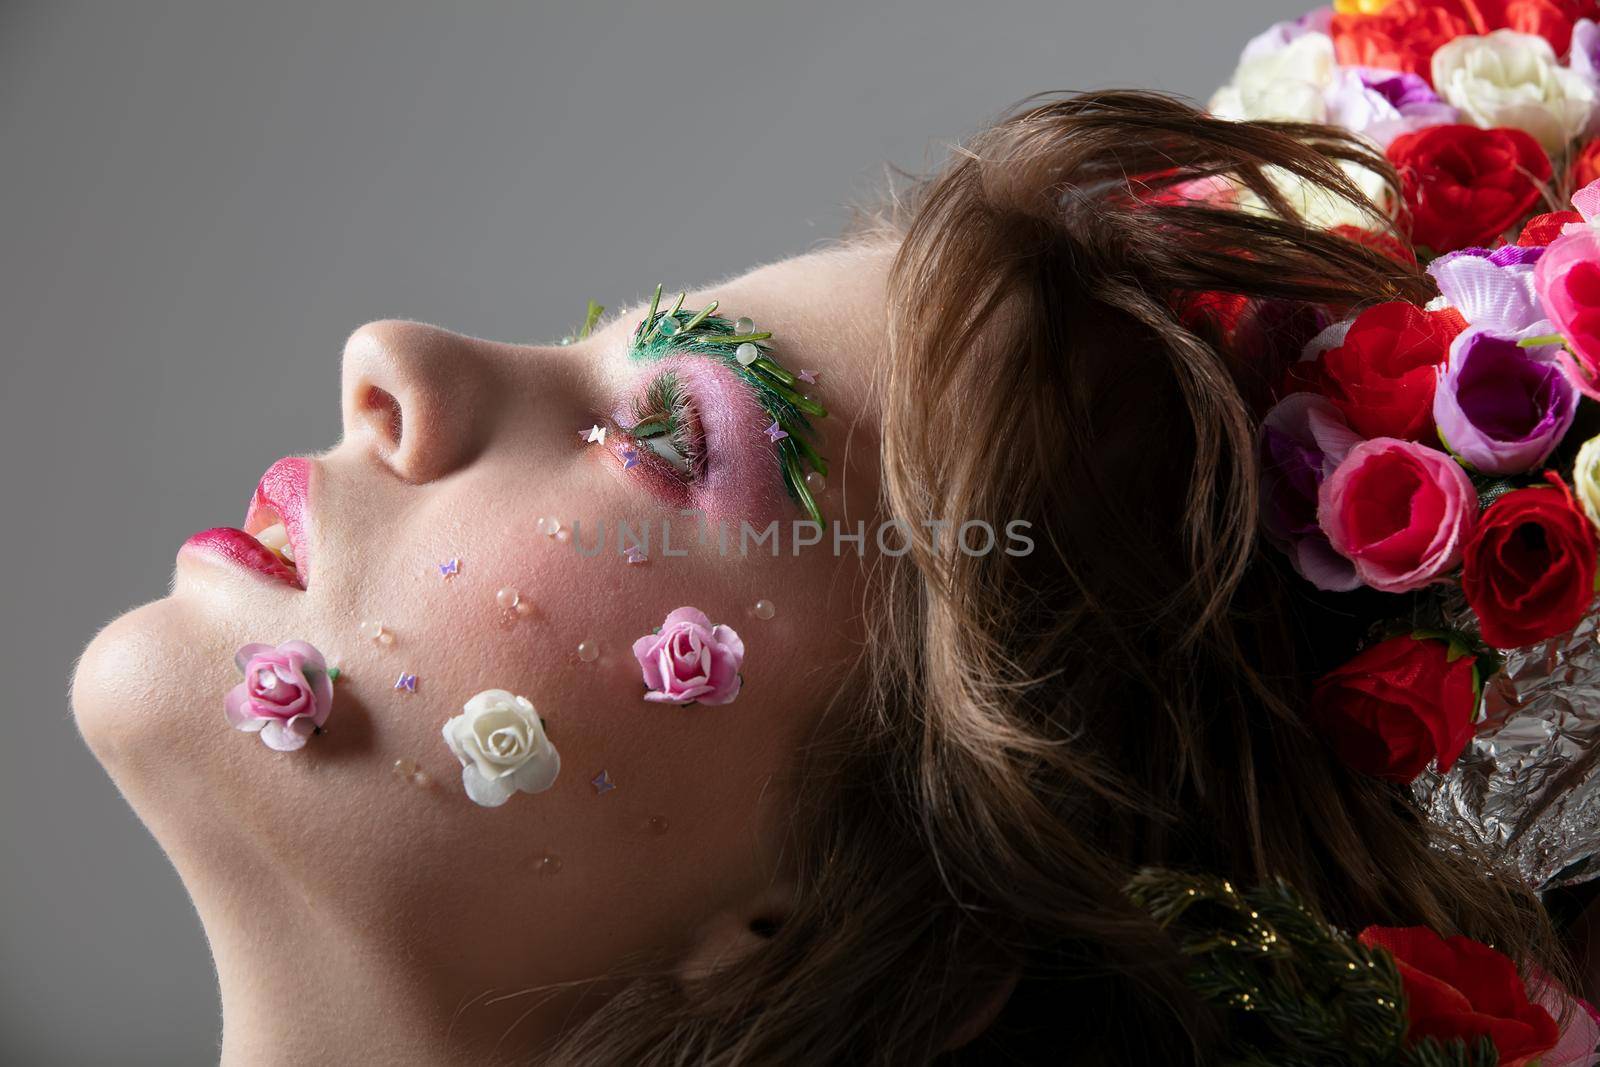 Face in profile of a girl close-up in floral makeup. Spring or summer beauty. Woman with flowers on her face.